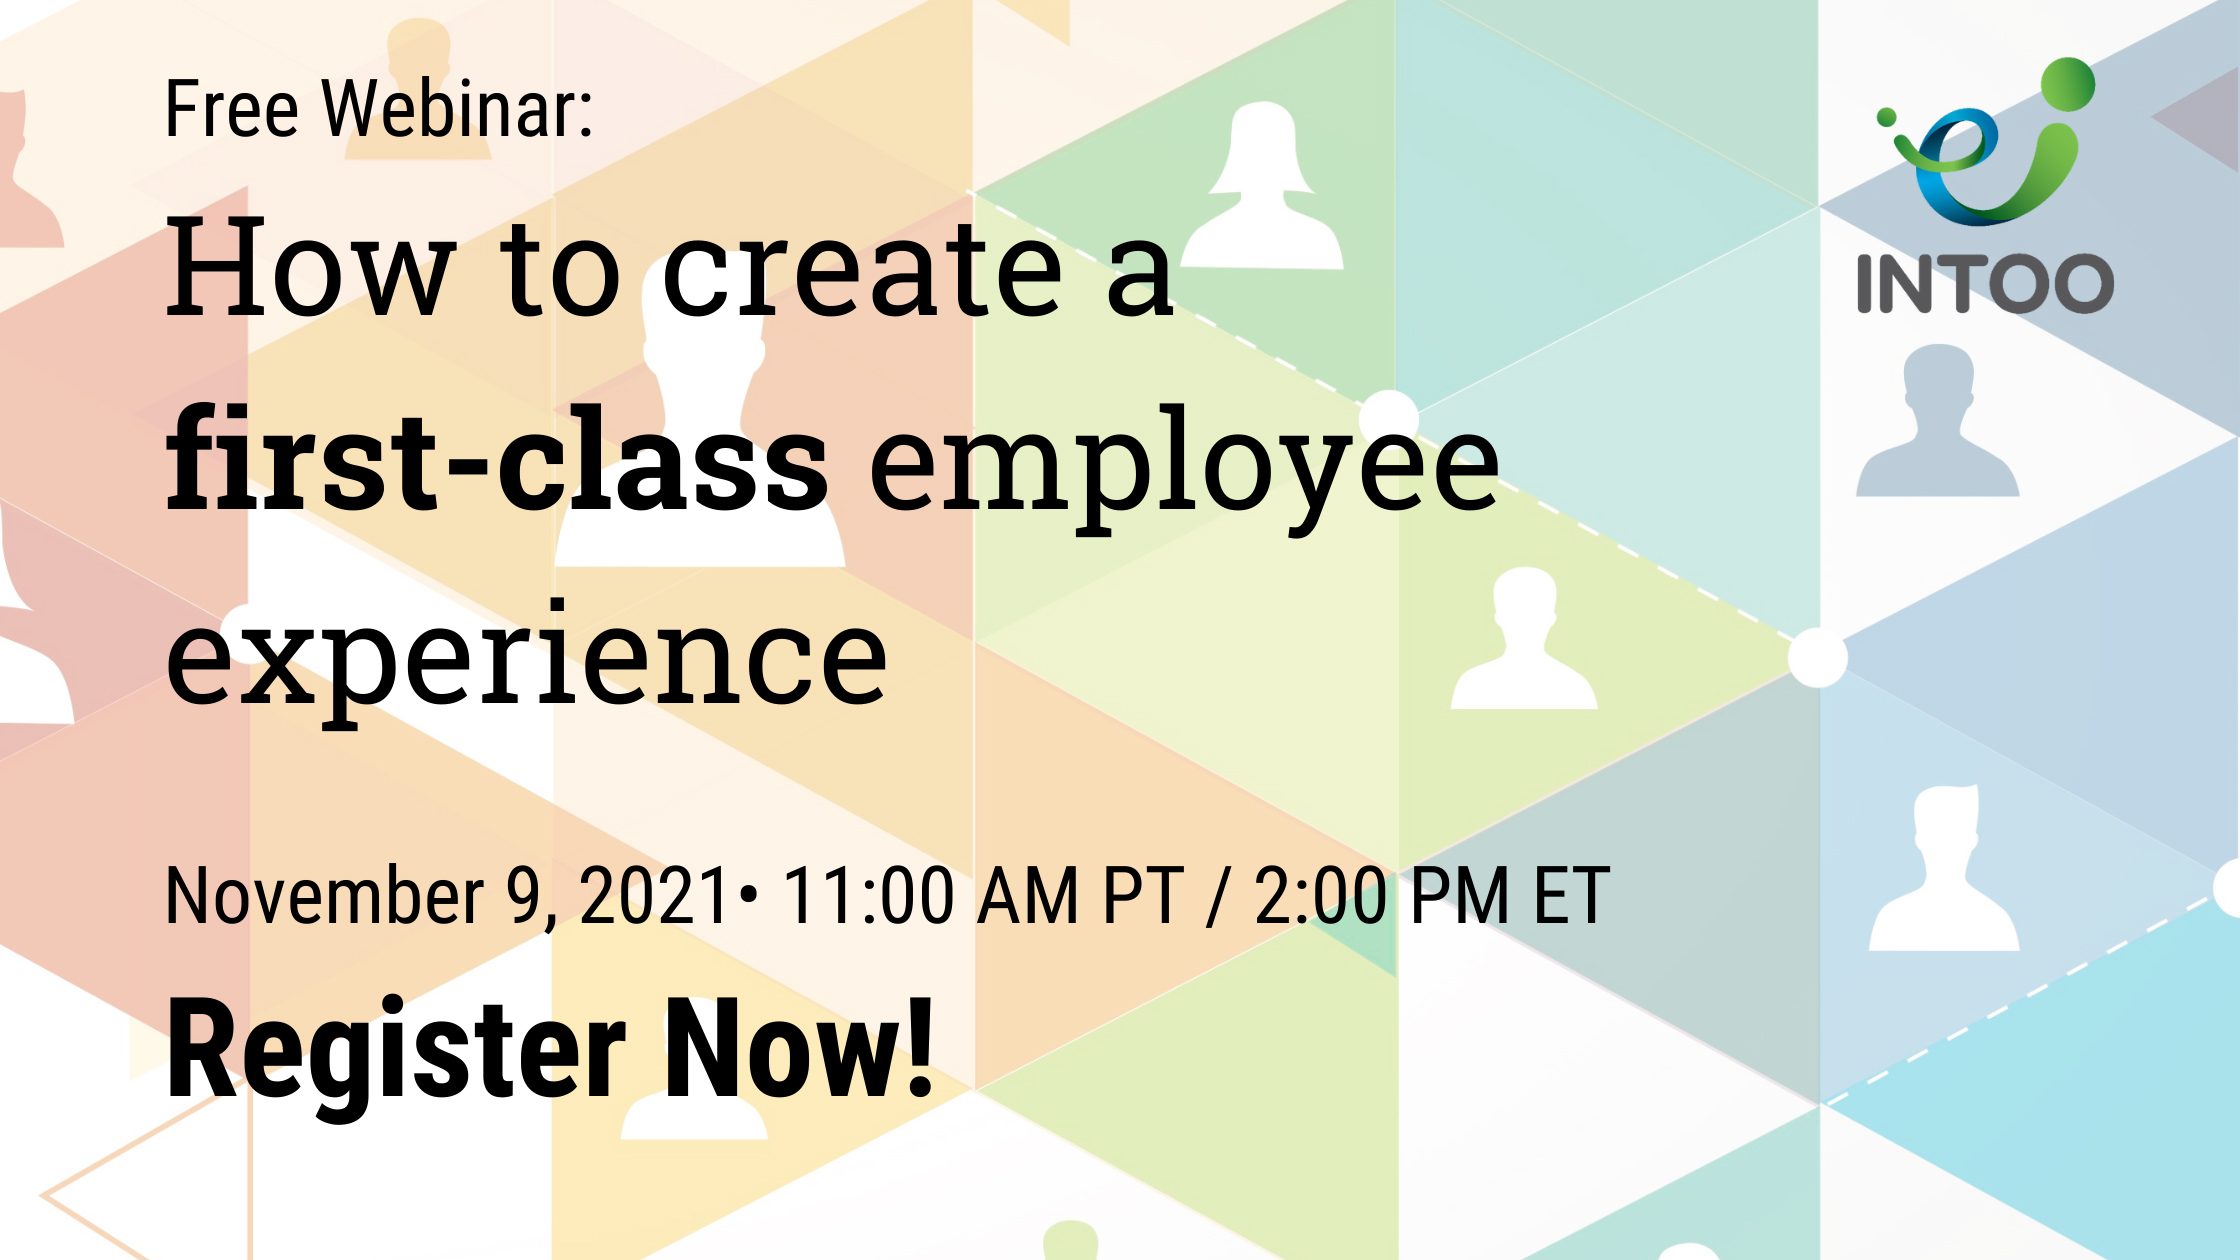 Free Webinar: How to create a first-class employee experience. November 9, 2021 11:00 AM PT / 2:00 PM PT - Register Now!